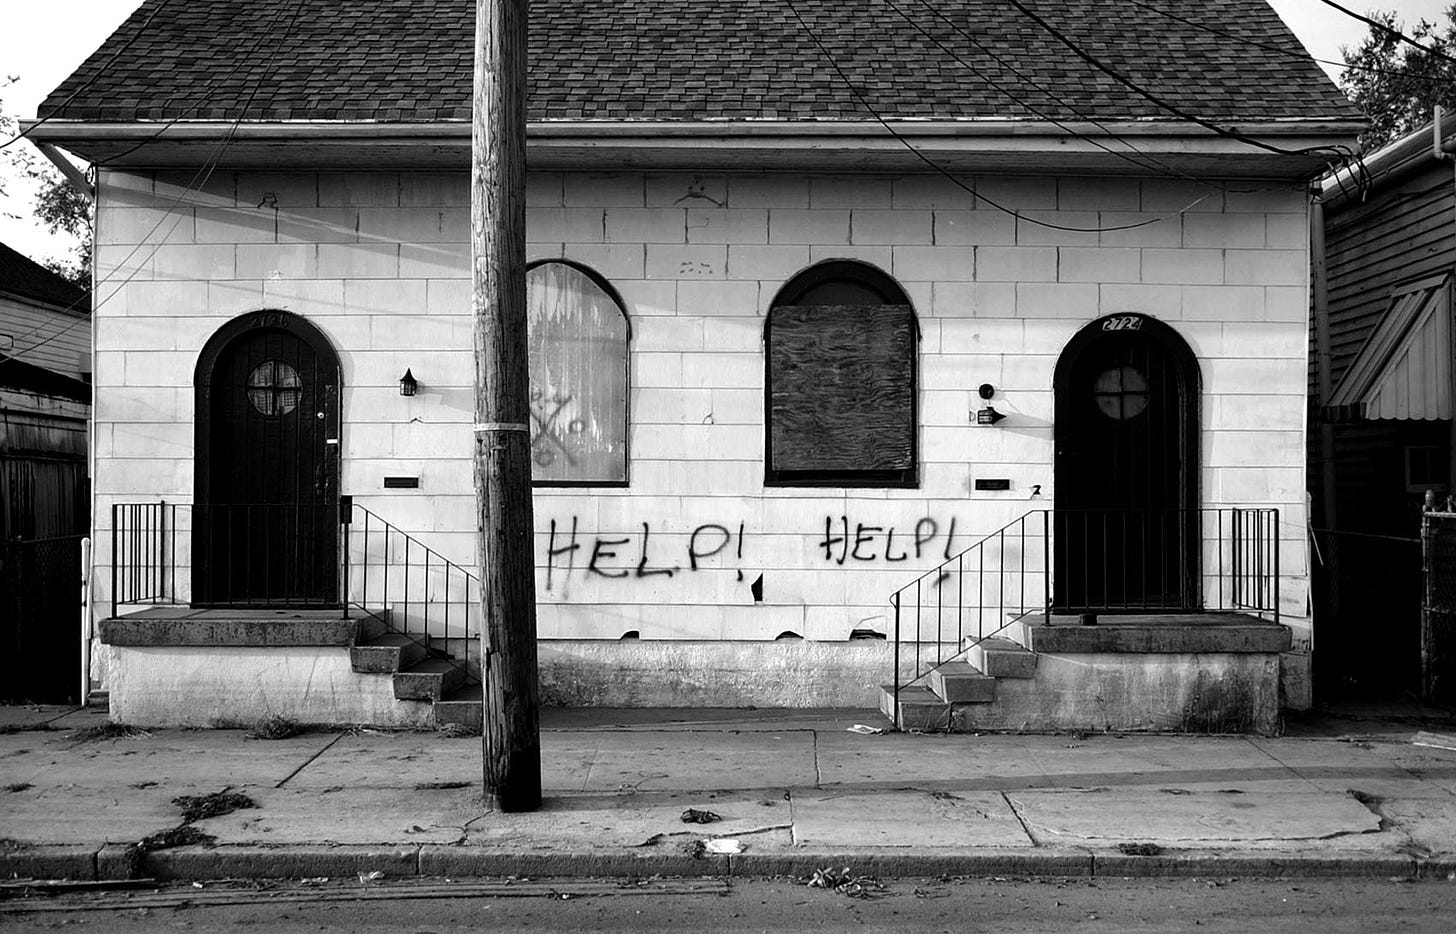 Strange sights in New Orleans two weeks after Hurricane Katrina –  Collective Vision | Photoblog for the Austin American-Statesman